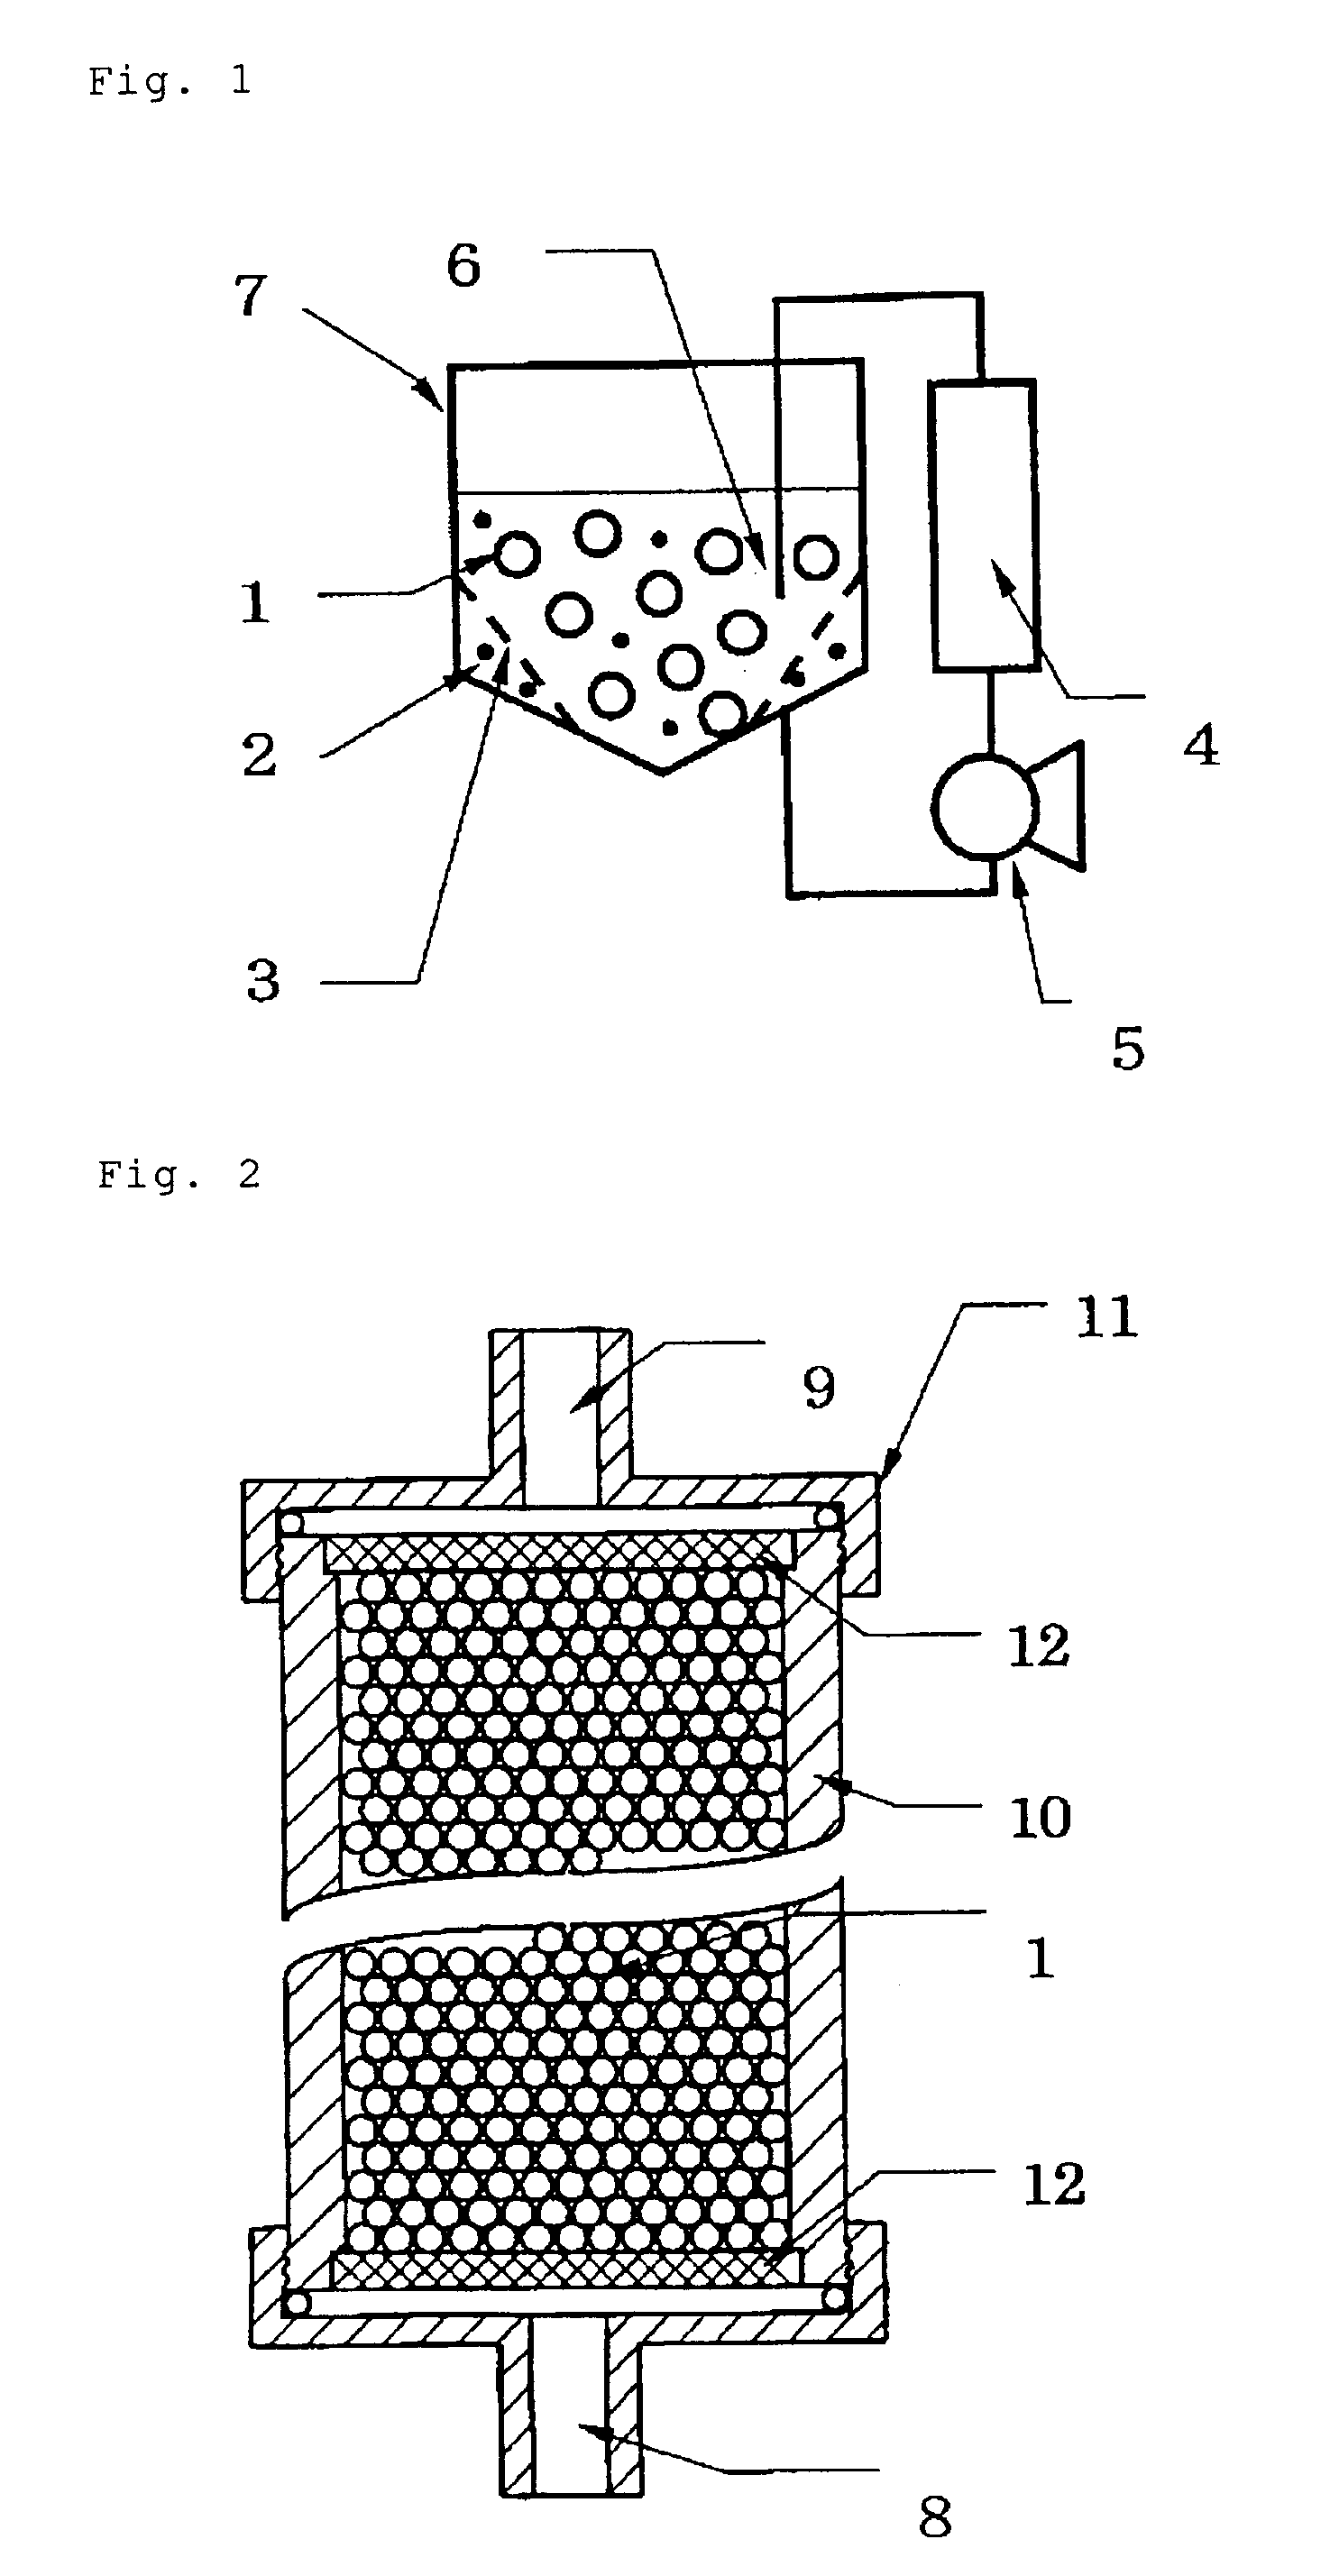 Direct hemoperfusion adsorber packed with adsorbent having water insoluble microparticle removed therefrom, and method of obtaining direct hemoperfusion adsorbent having water insoluble microparticle removed therefrom